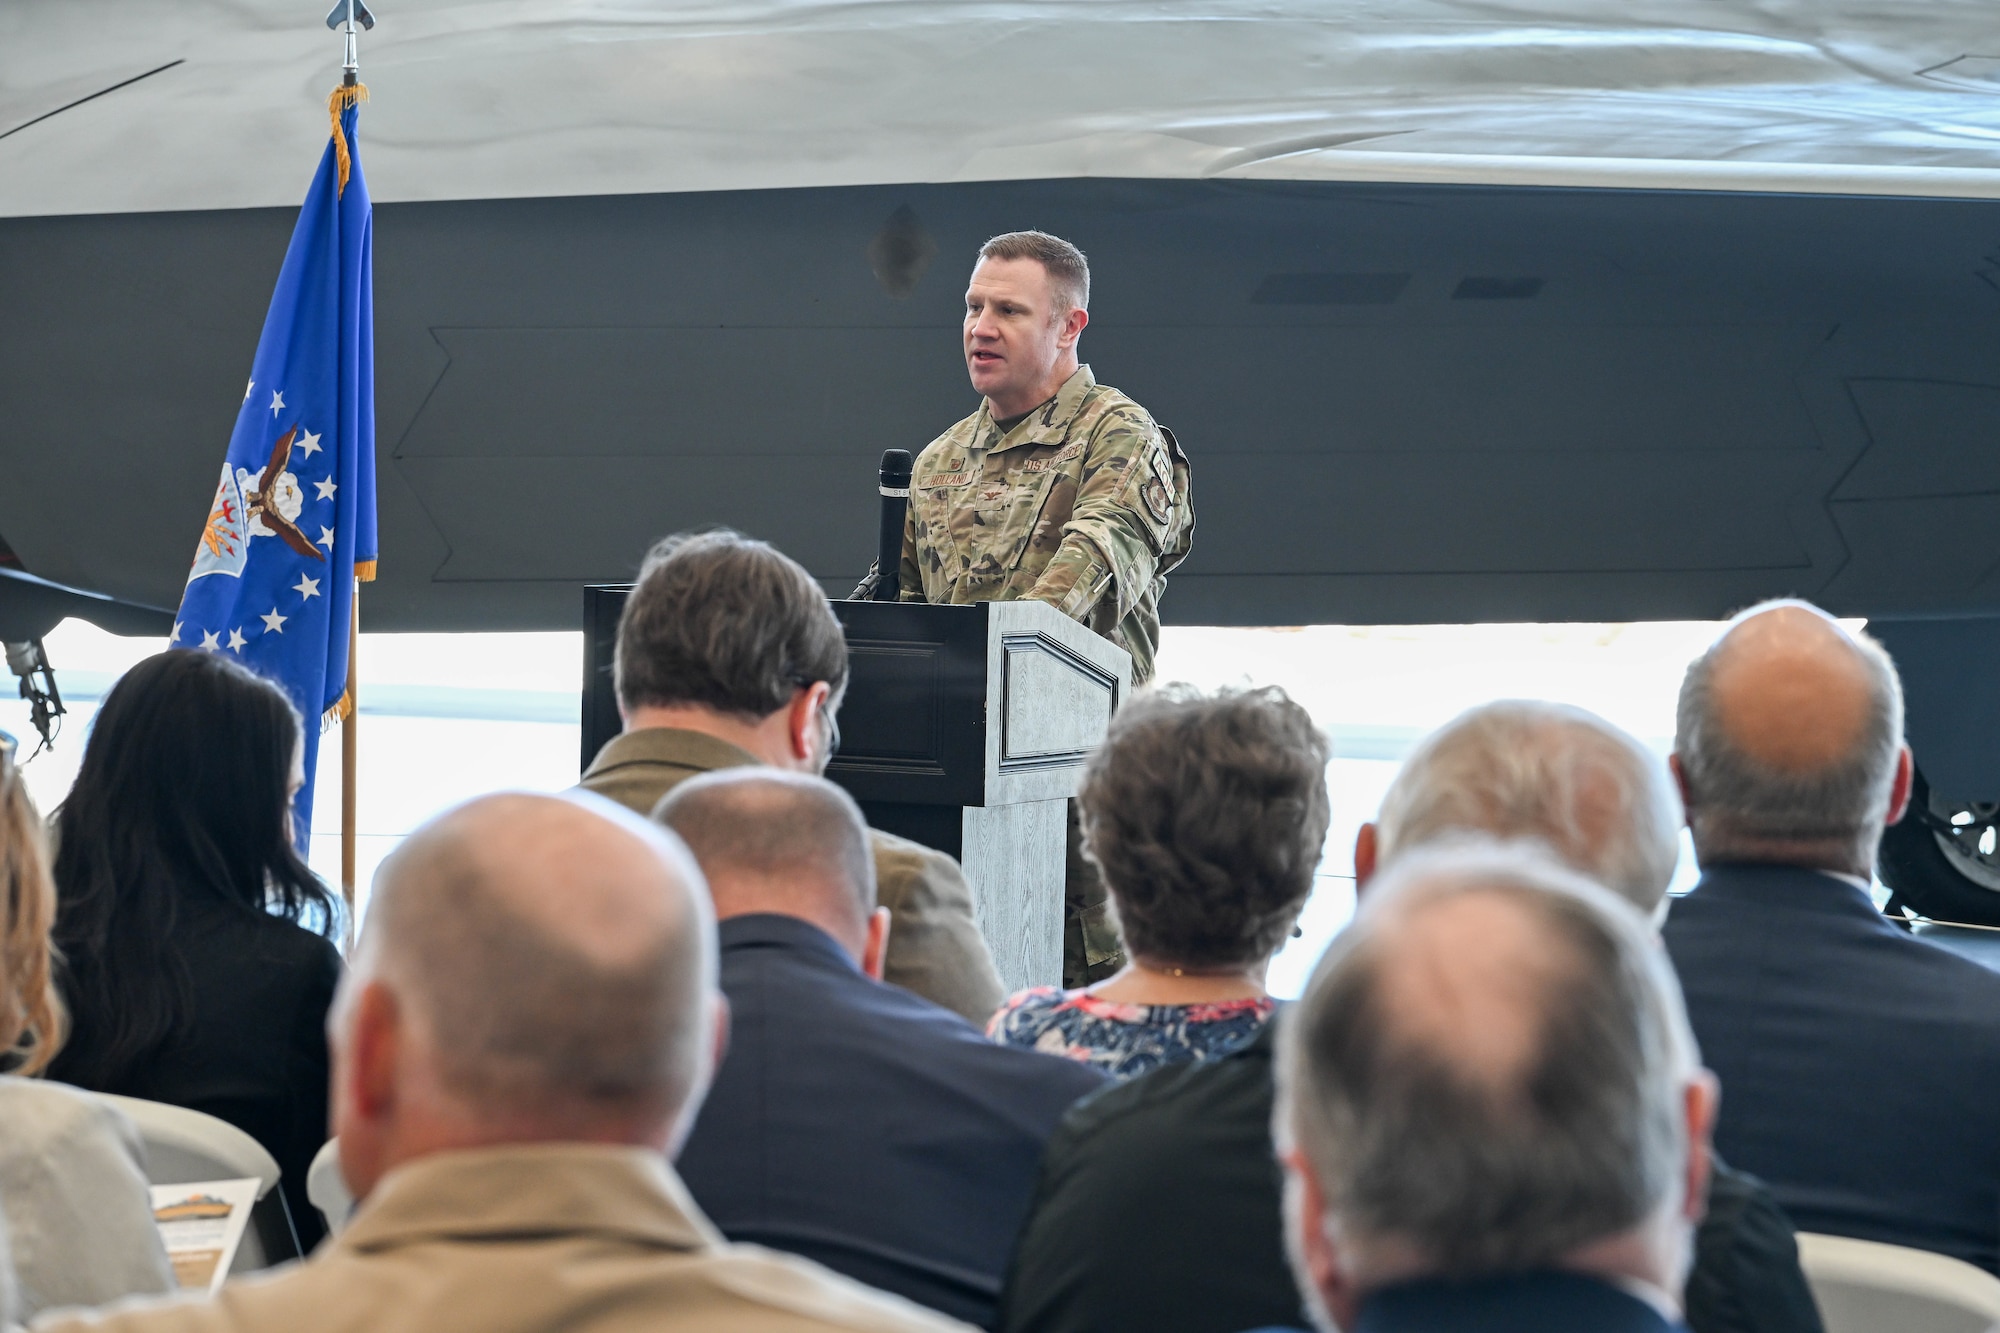 Col. Jeffrey Holland, 75th Air Base Wing commander, speaks at the ribbon cutting ceremony of the new L.S. Skaggs Gallery at the Hill Aerospace Museum at Hill Air Force Base, Utah, April 29, 2024. The new gallery is a 91,000 square foot hangar and provides a 70% increase to the indoor exhibition space. (U.S. Air Force photo by Cynthia Griggs)